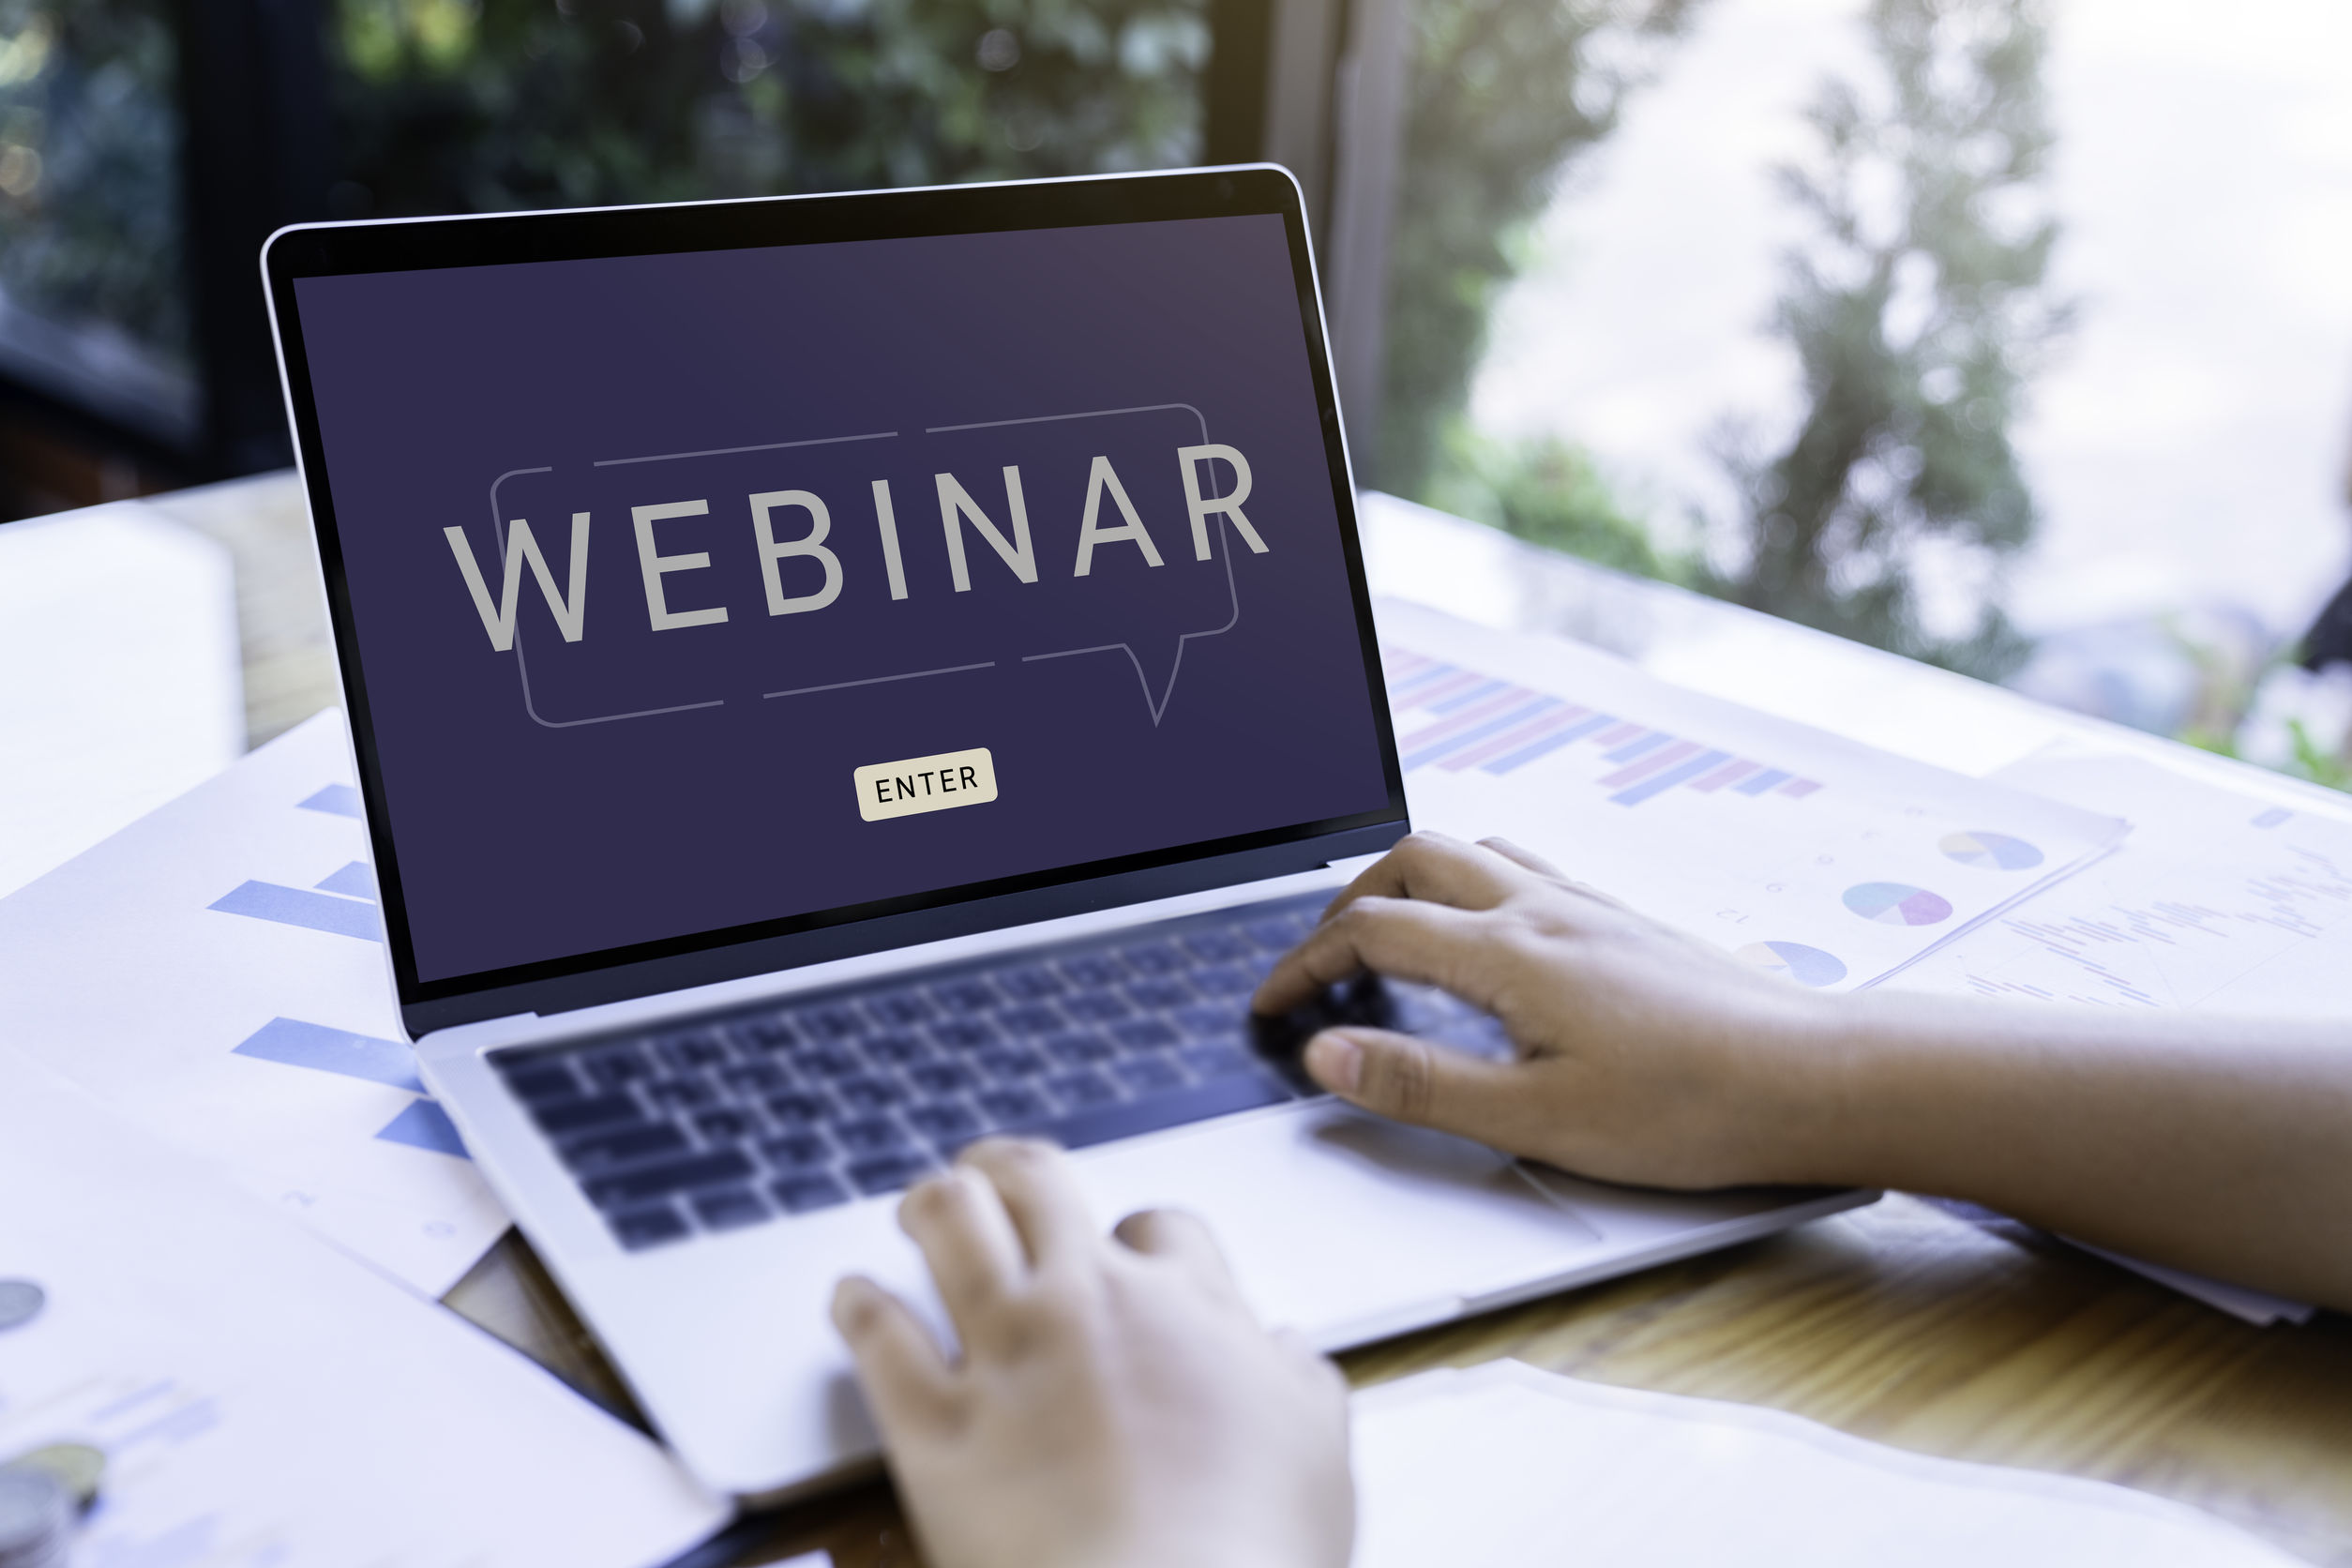 Take Your Business to the Next Level with Our May Webinars